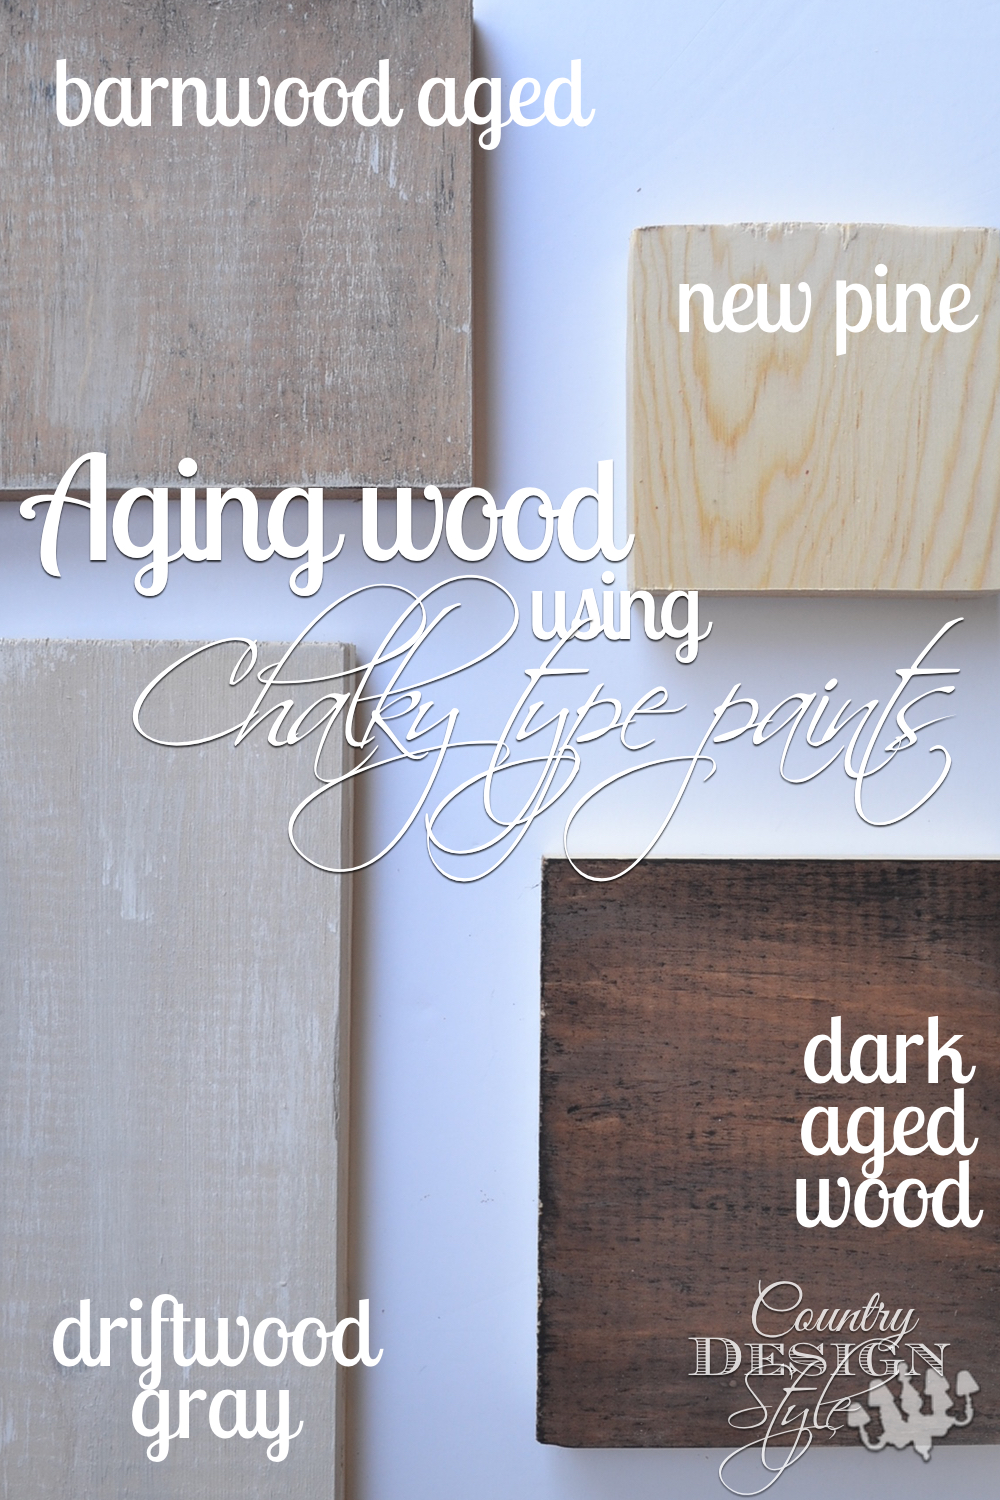 Learn my how to tip to turn new wood to barnwood using chalky paint. DIY that's easy. country design style